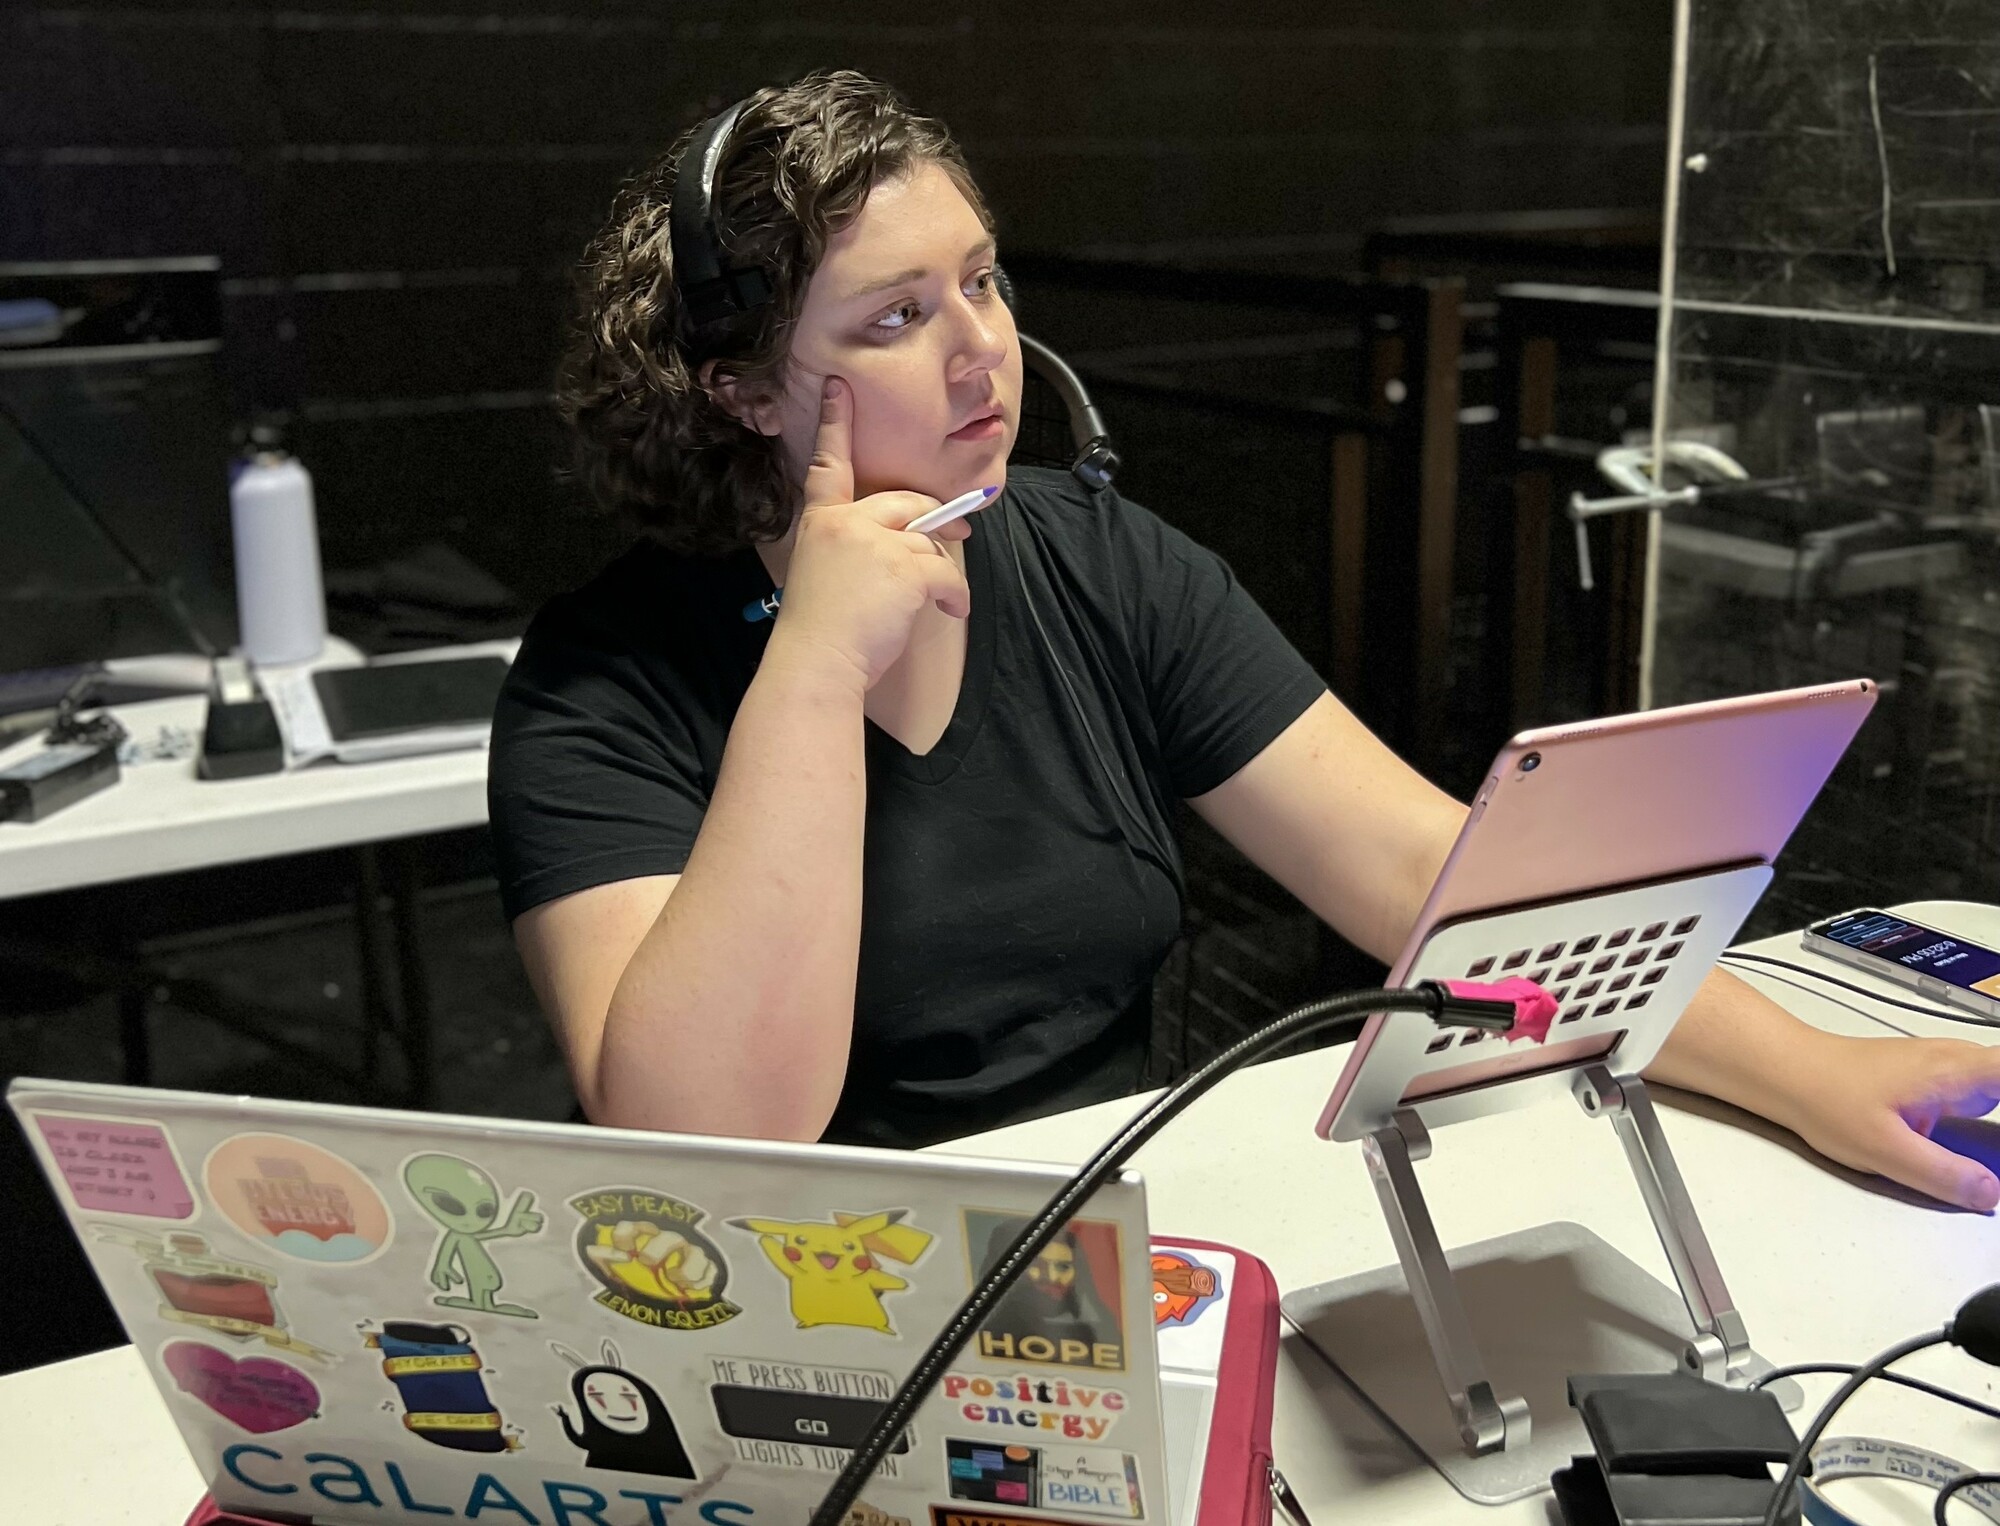 Macy Kunke wears a headset and attends to multiple screens at a stage management table.